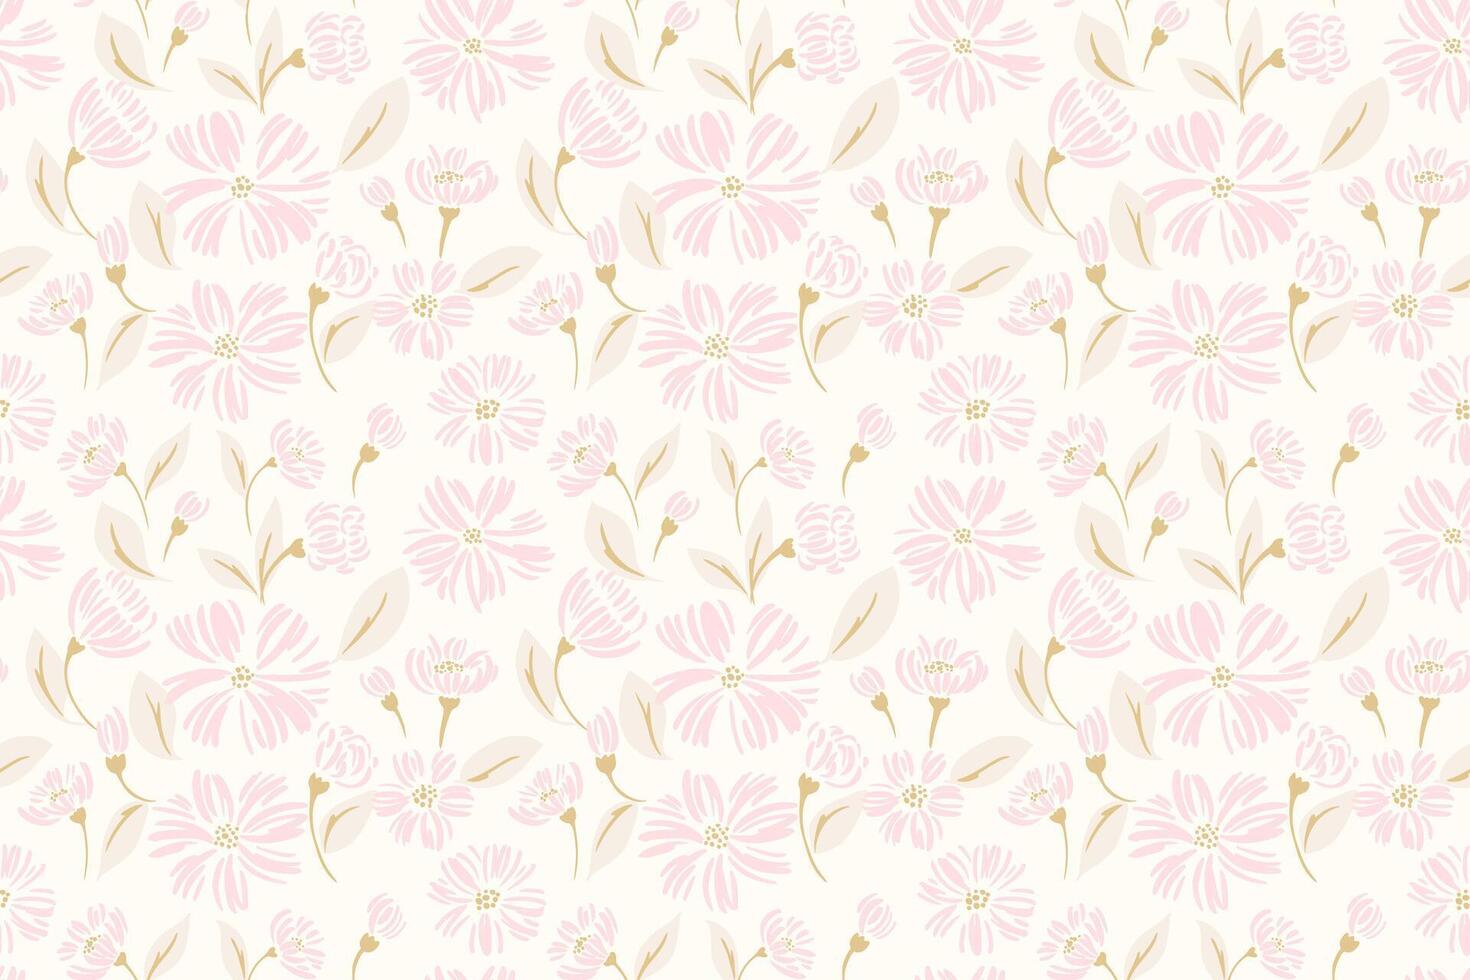 Pastel soft or gently abstract flowers and buds, shapes leaves seamless pattern. Vector hand drawn sketch. Simple creative ditsy floral background. Template for designs, fashion, children textiles